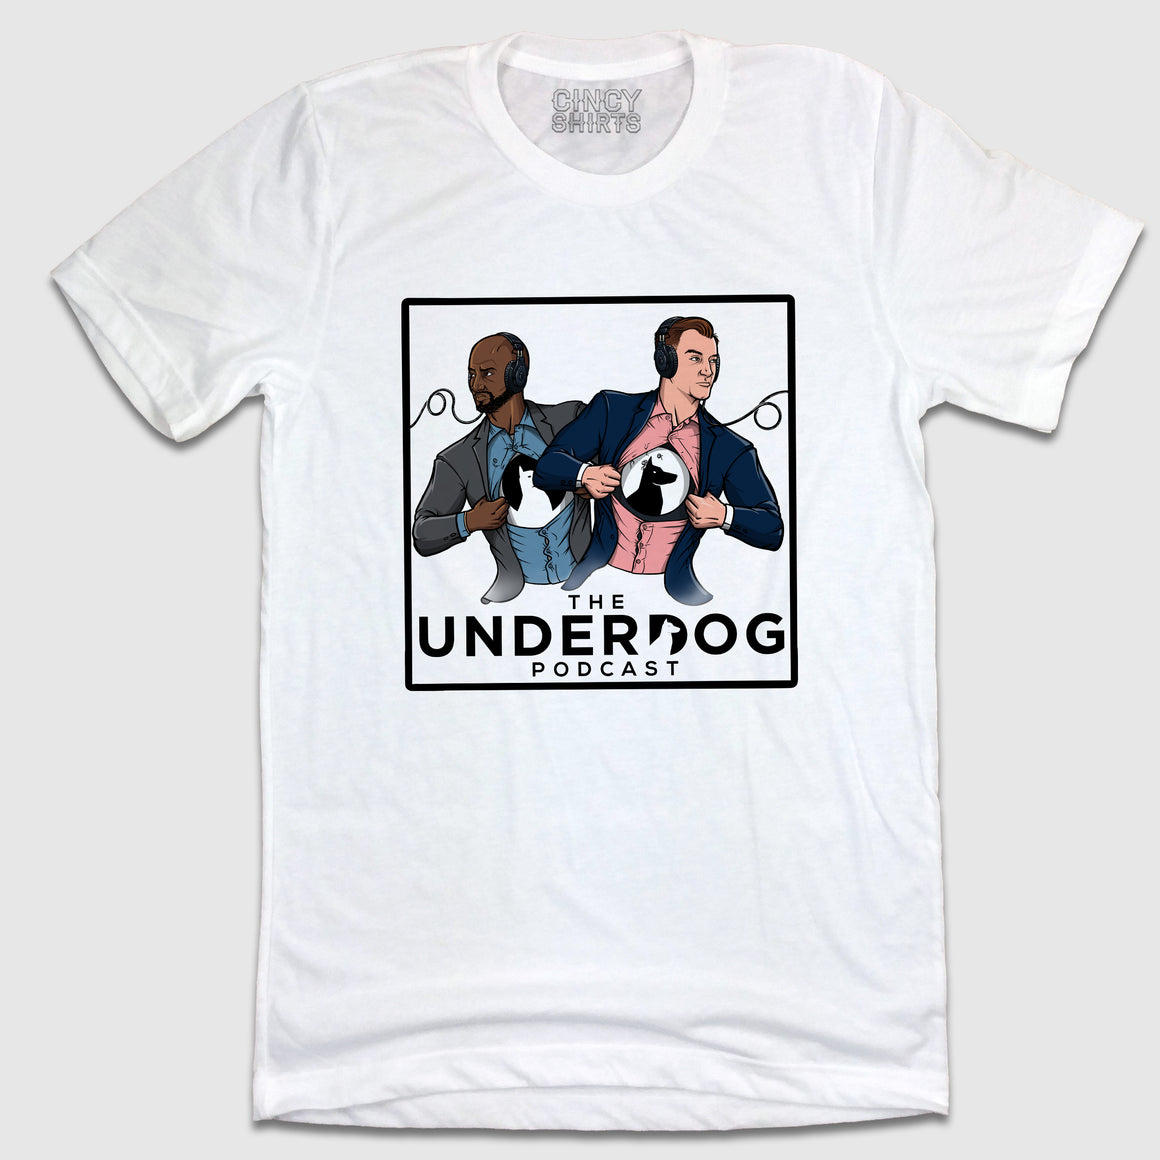 The Underdog Podcast - Full Color Logo - Cincy Shirts